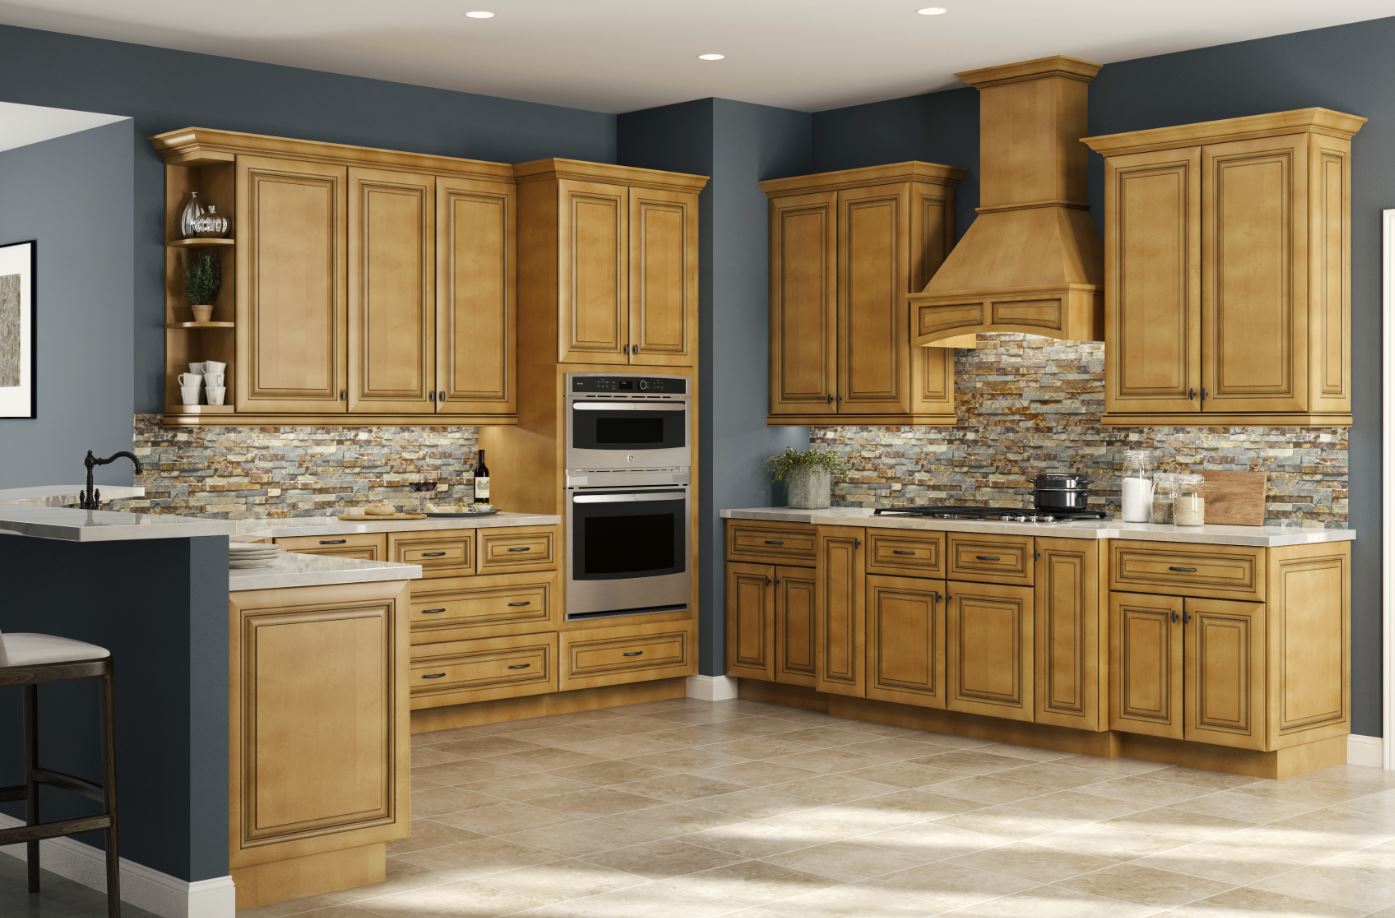 Lewiston Pantry Cabinets In Toffee Glaze Kitchen The Home Depot